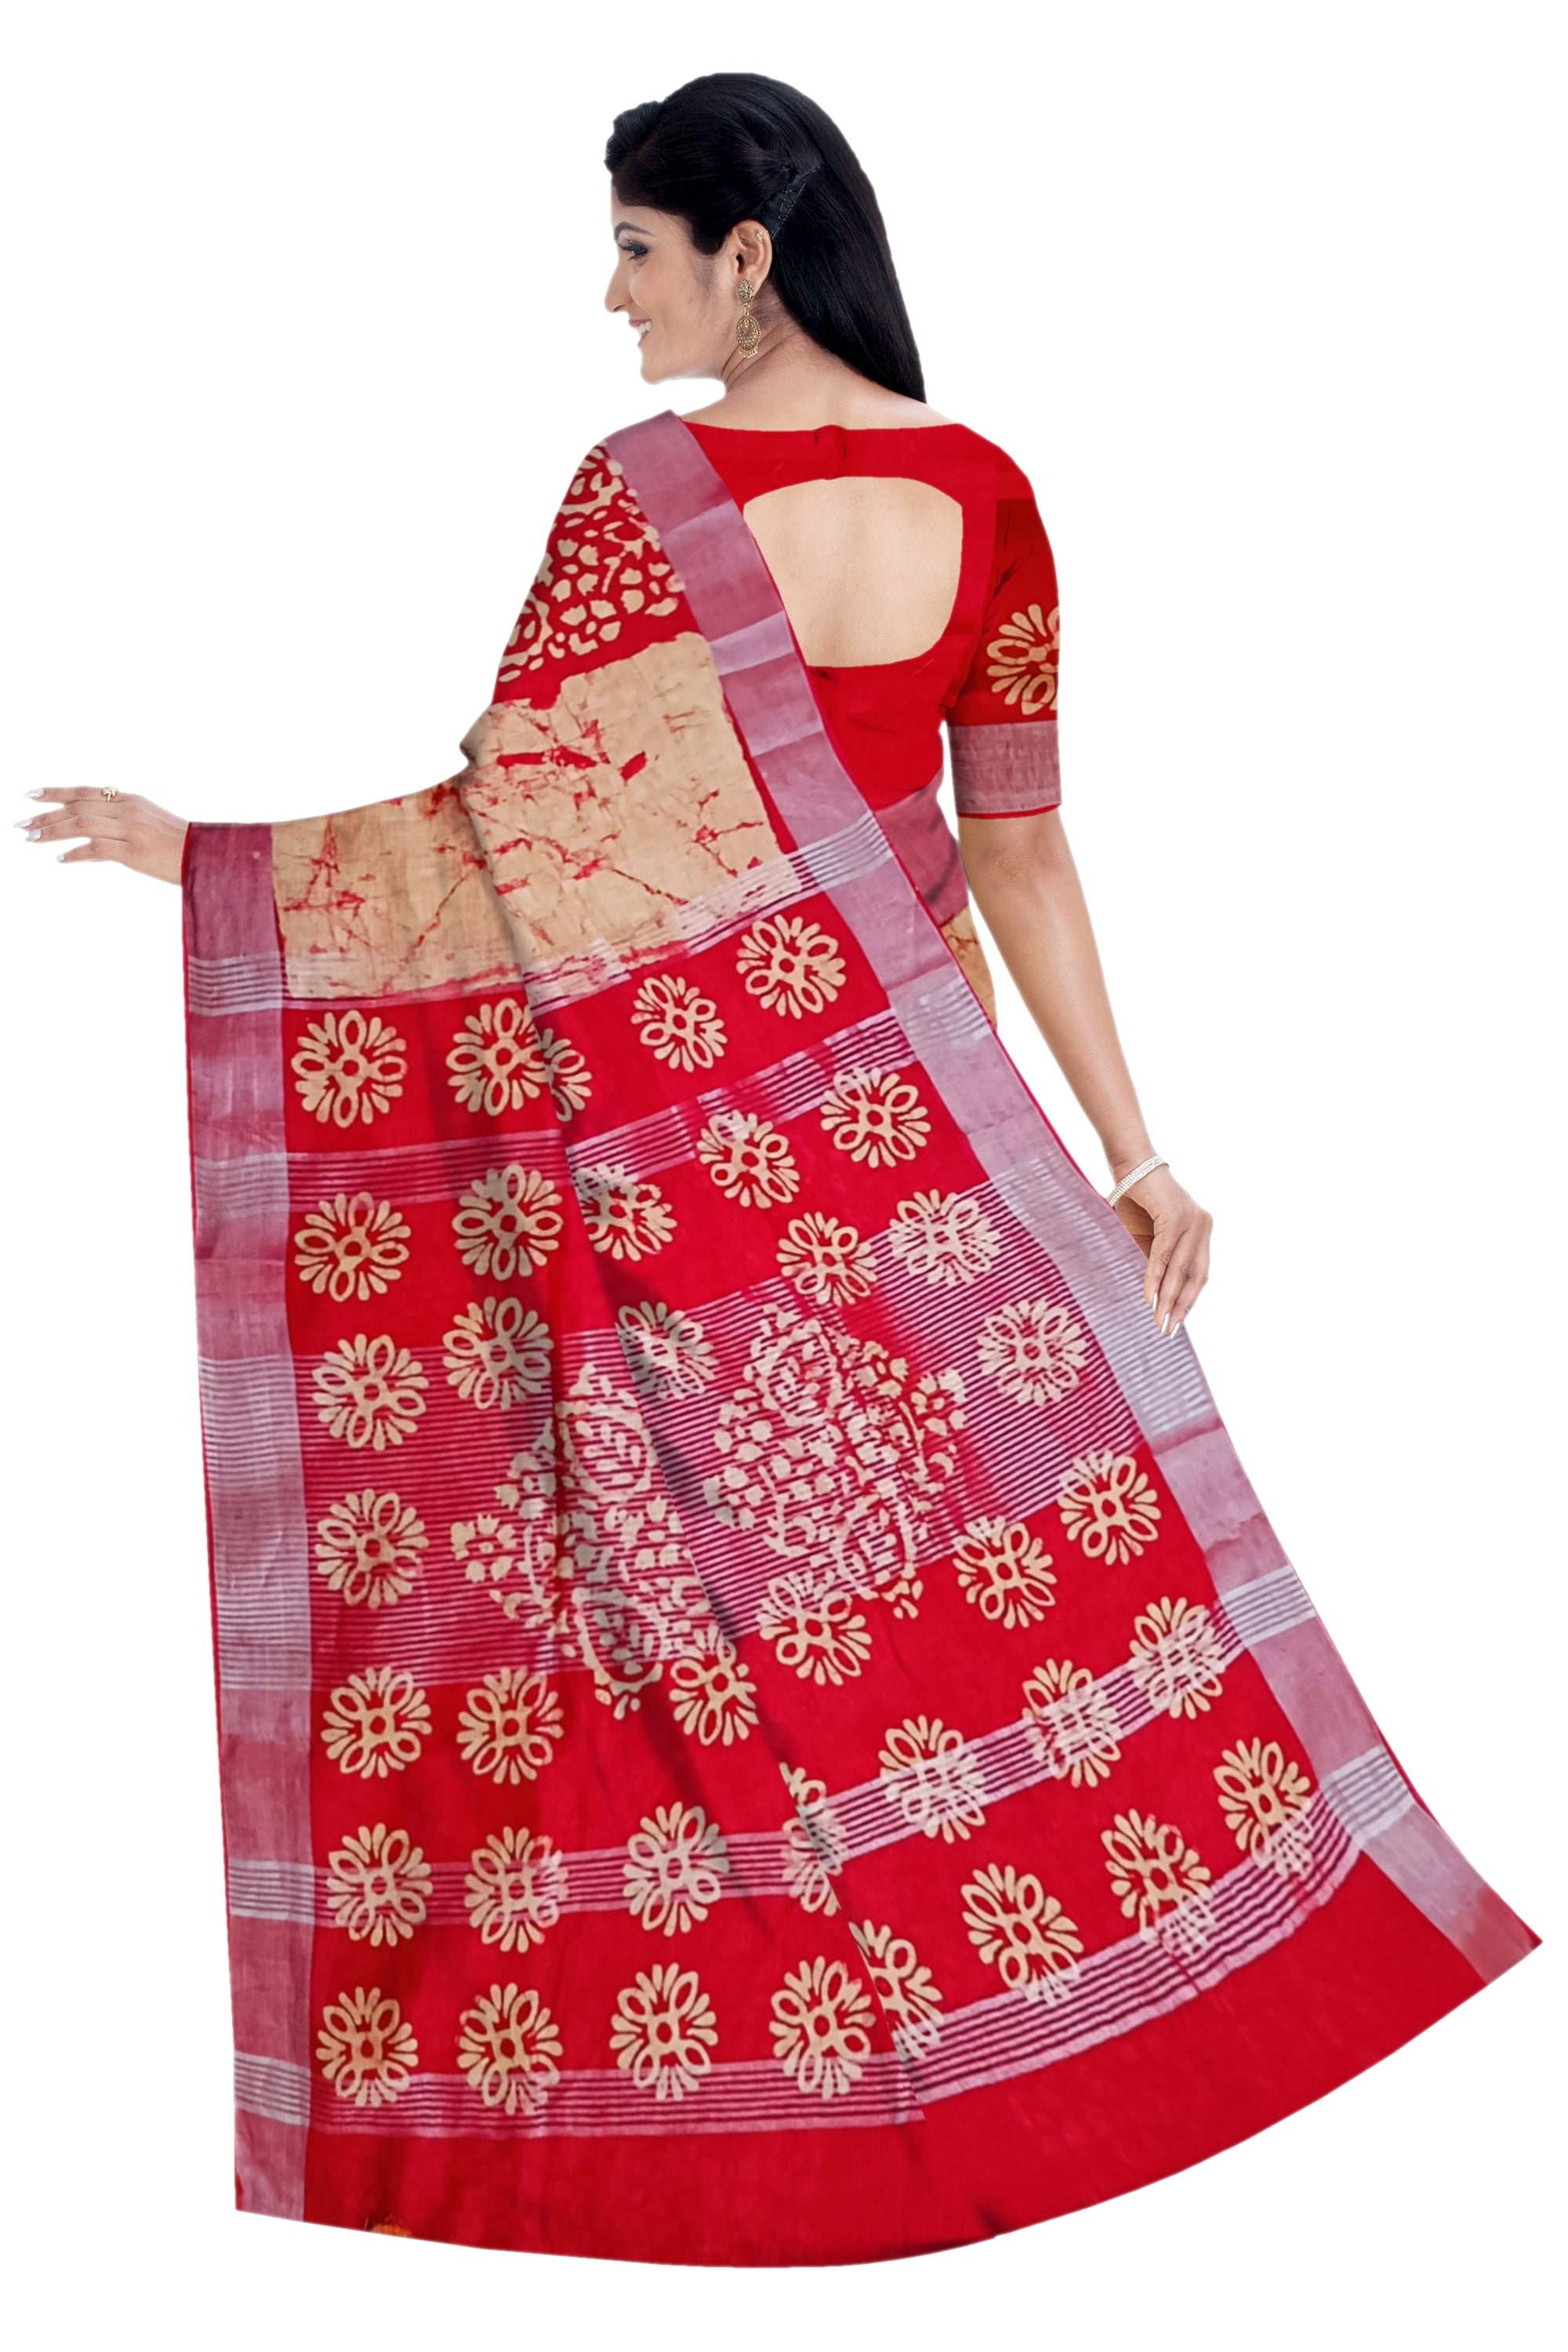 Sandalwood Linen Saree With Red Printed Design